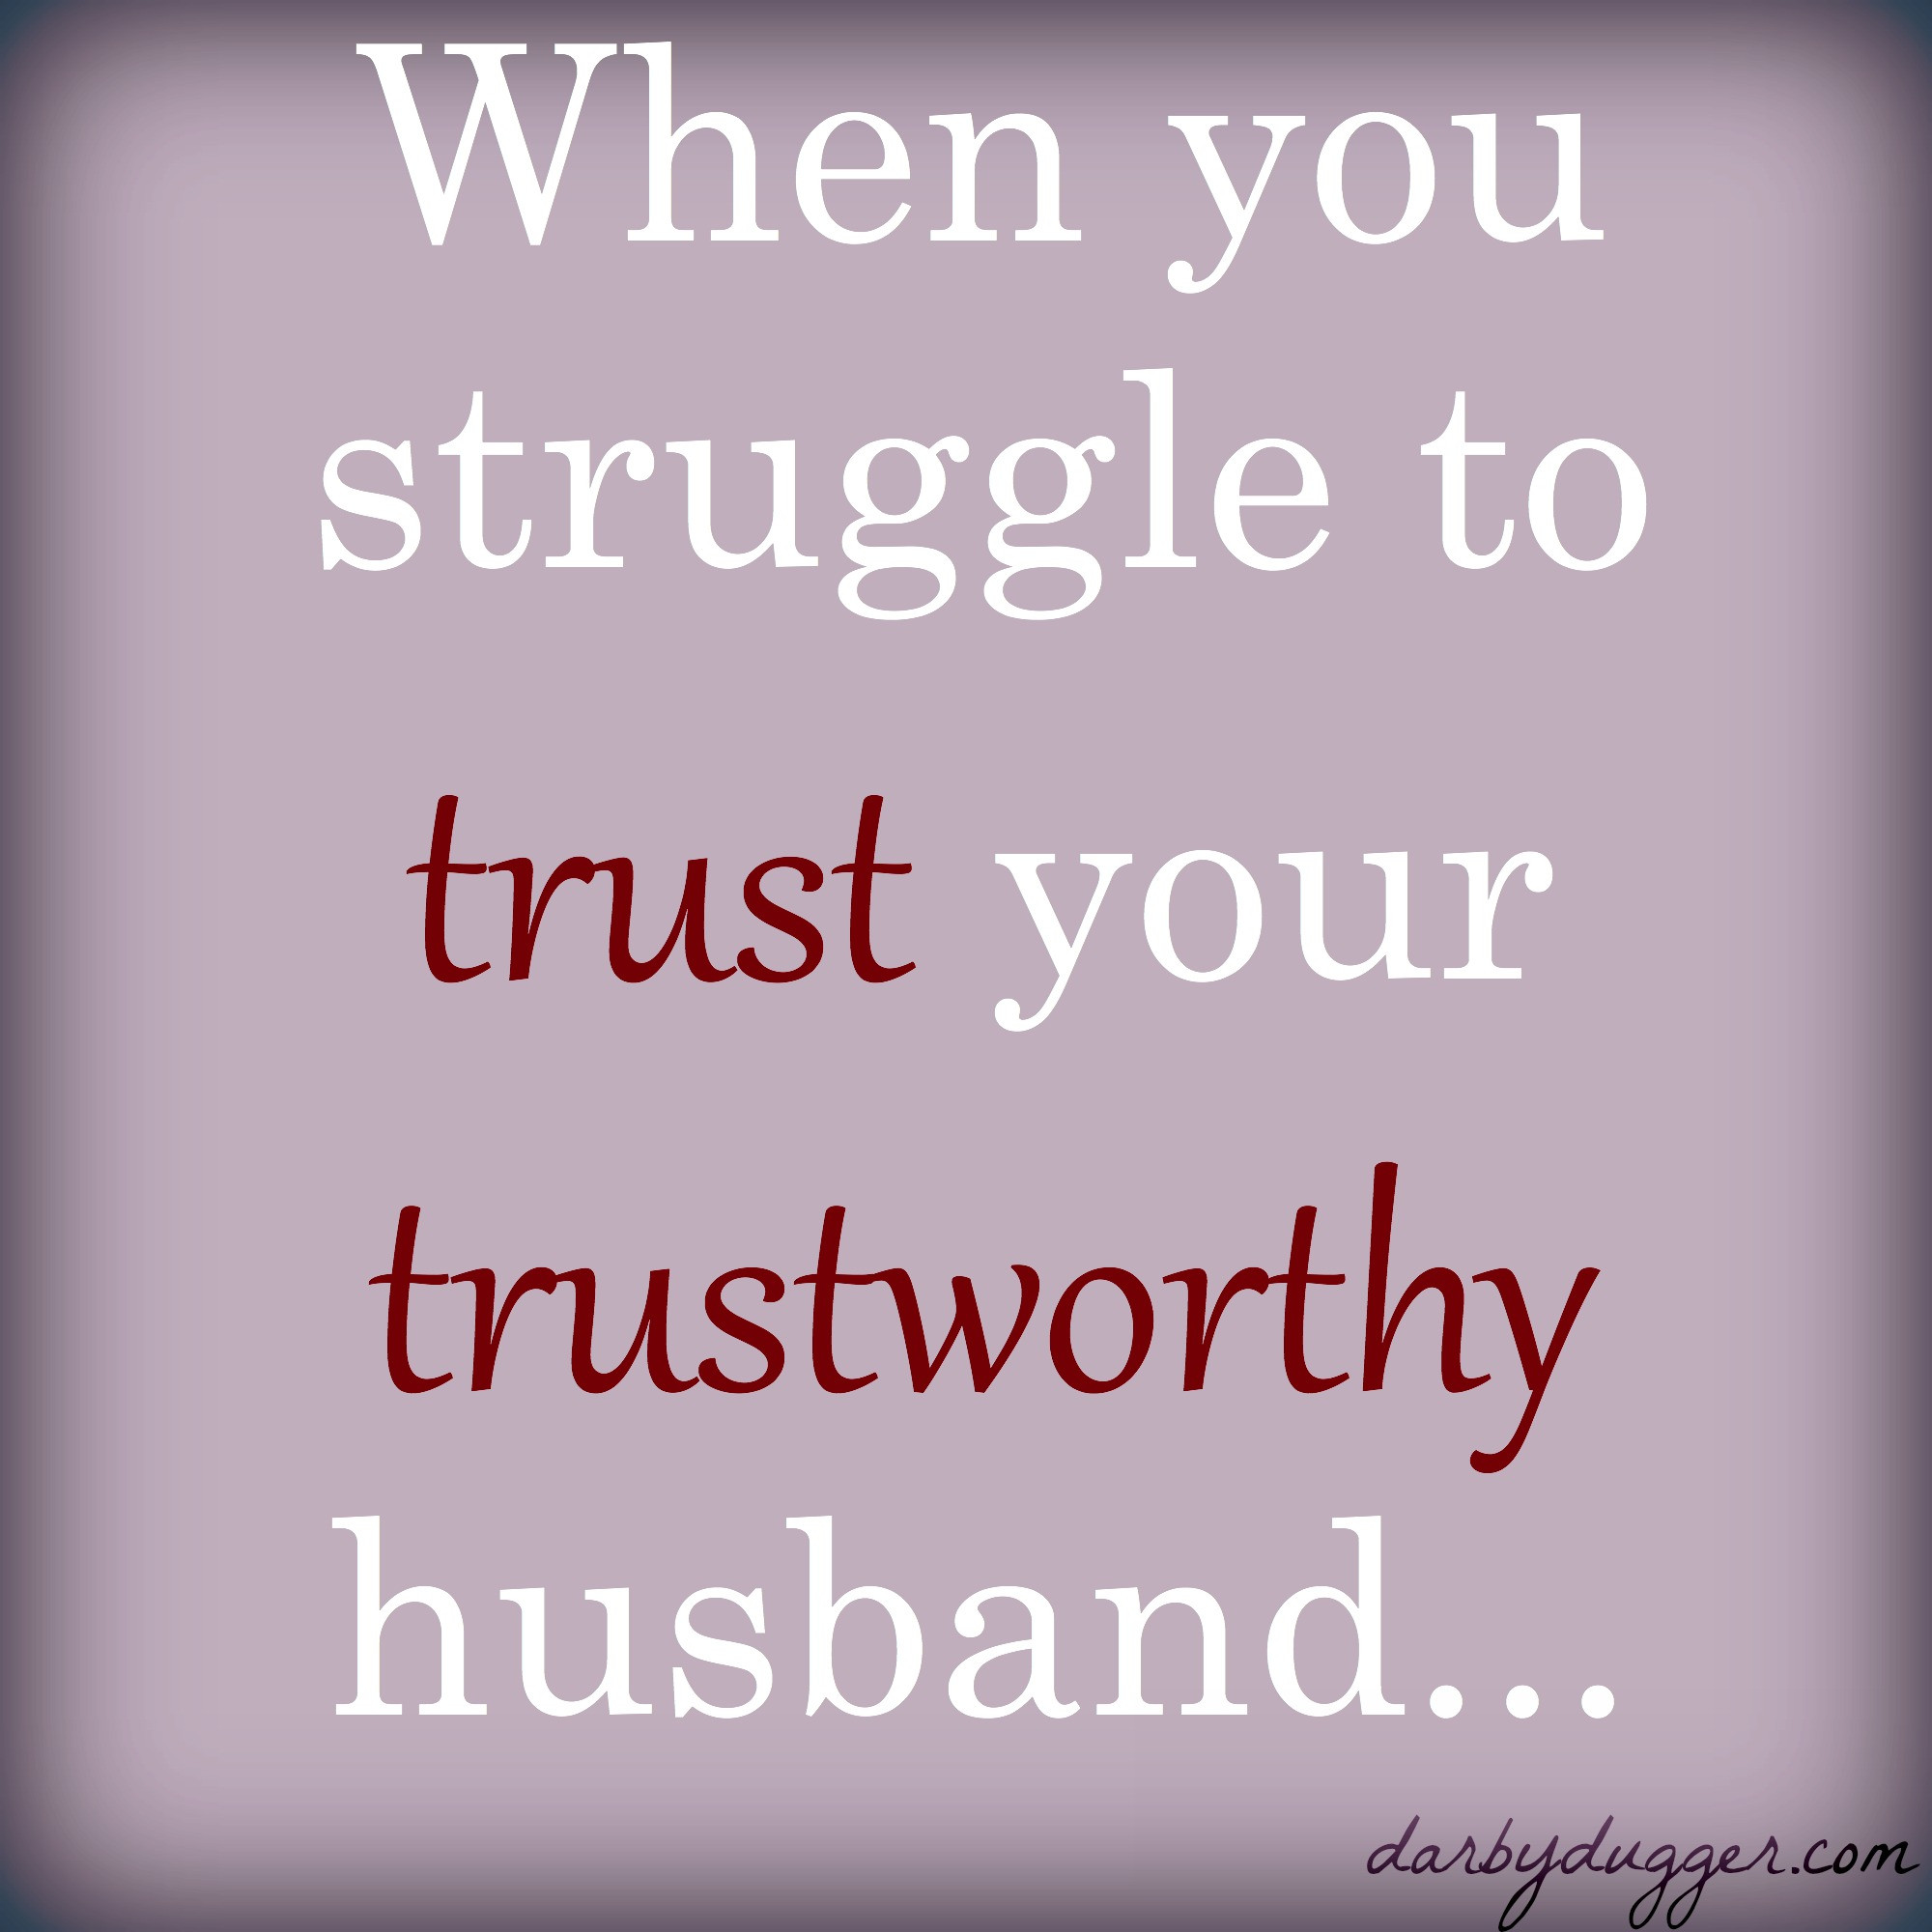 Struggling Marriage Quotes
 Struggling Quotes In Marriage QuotesGram